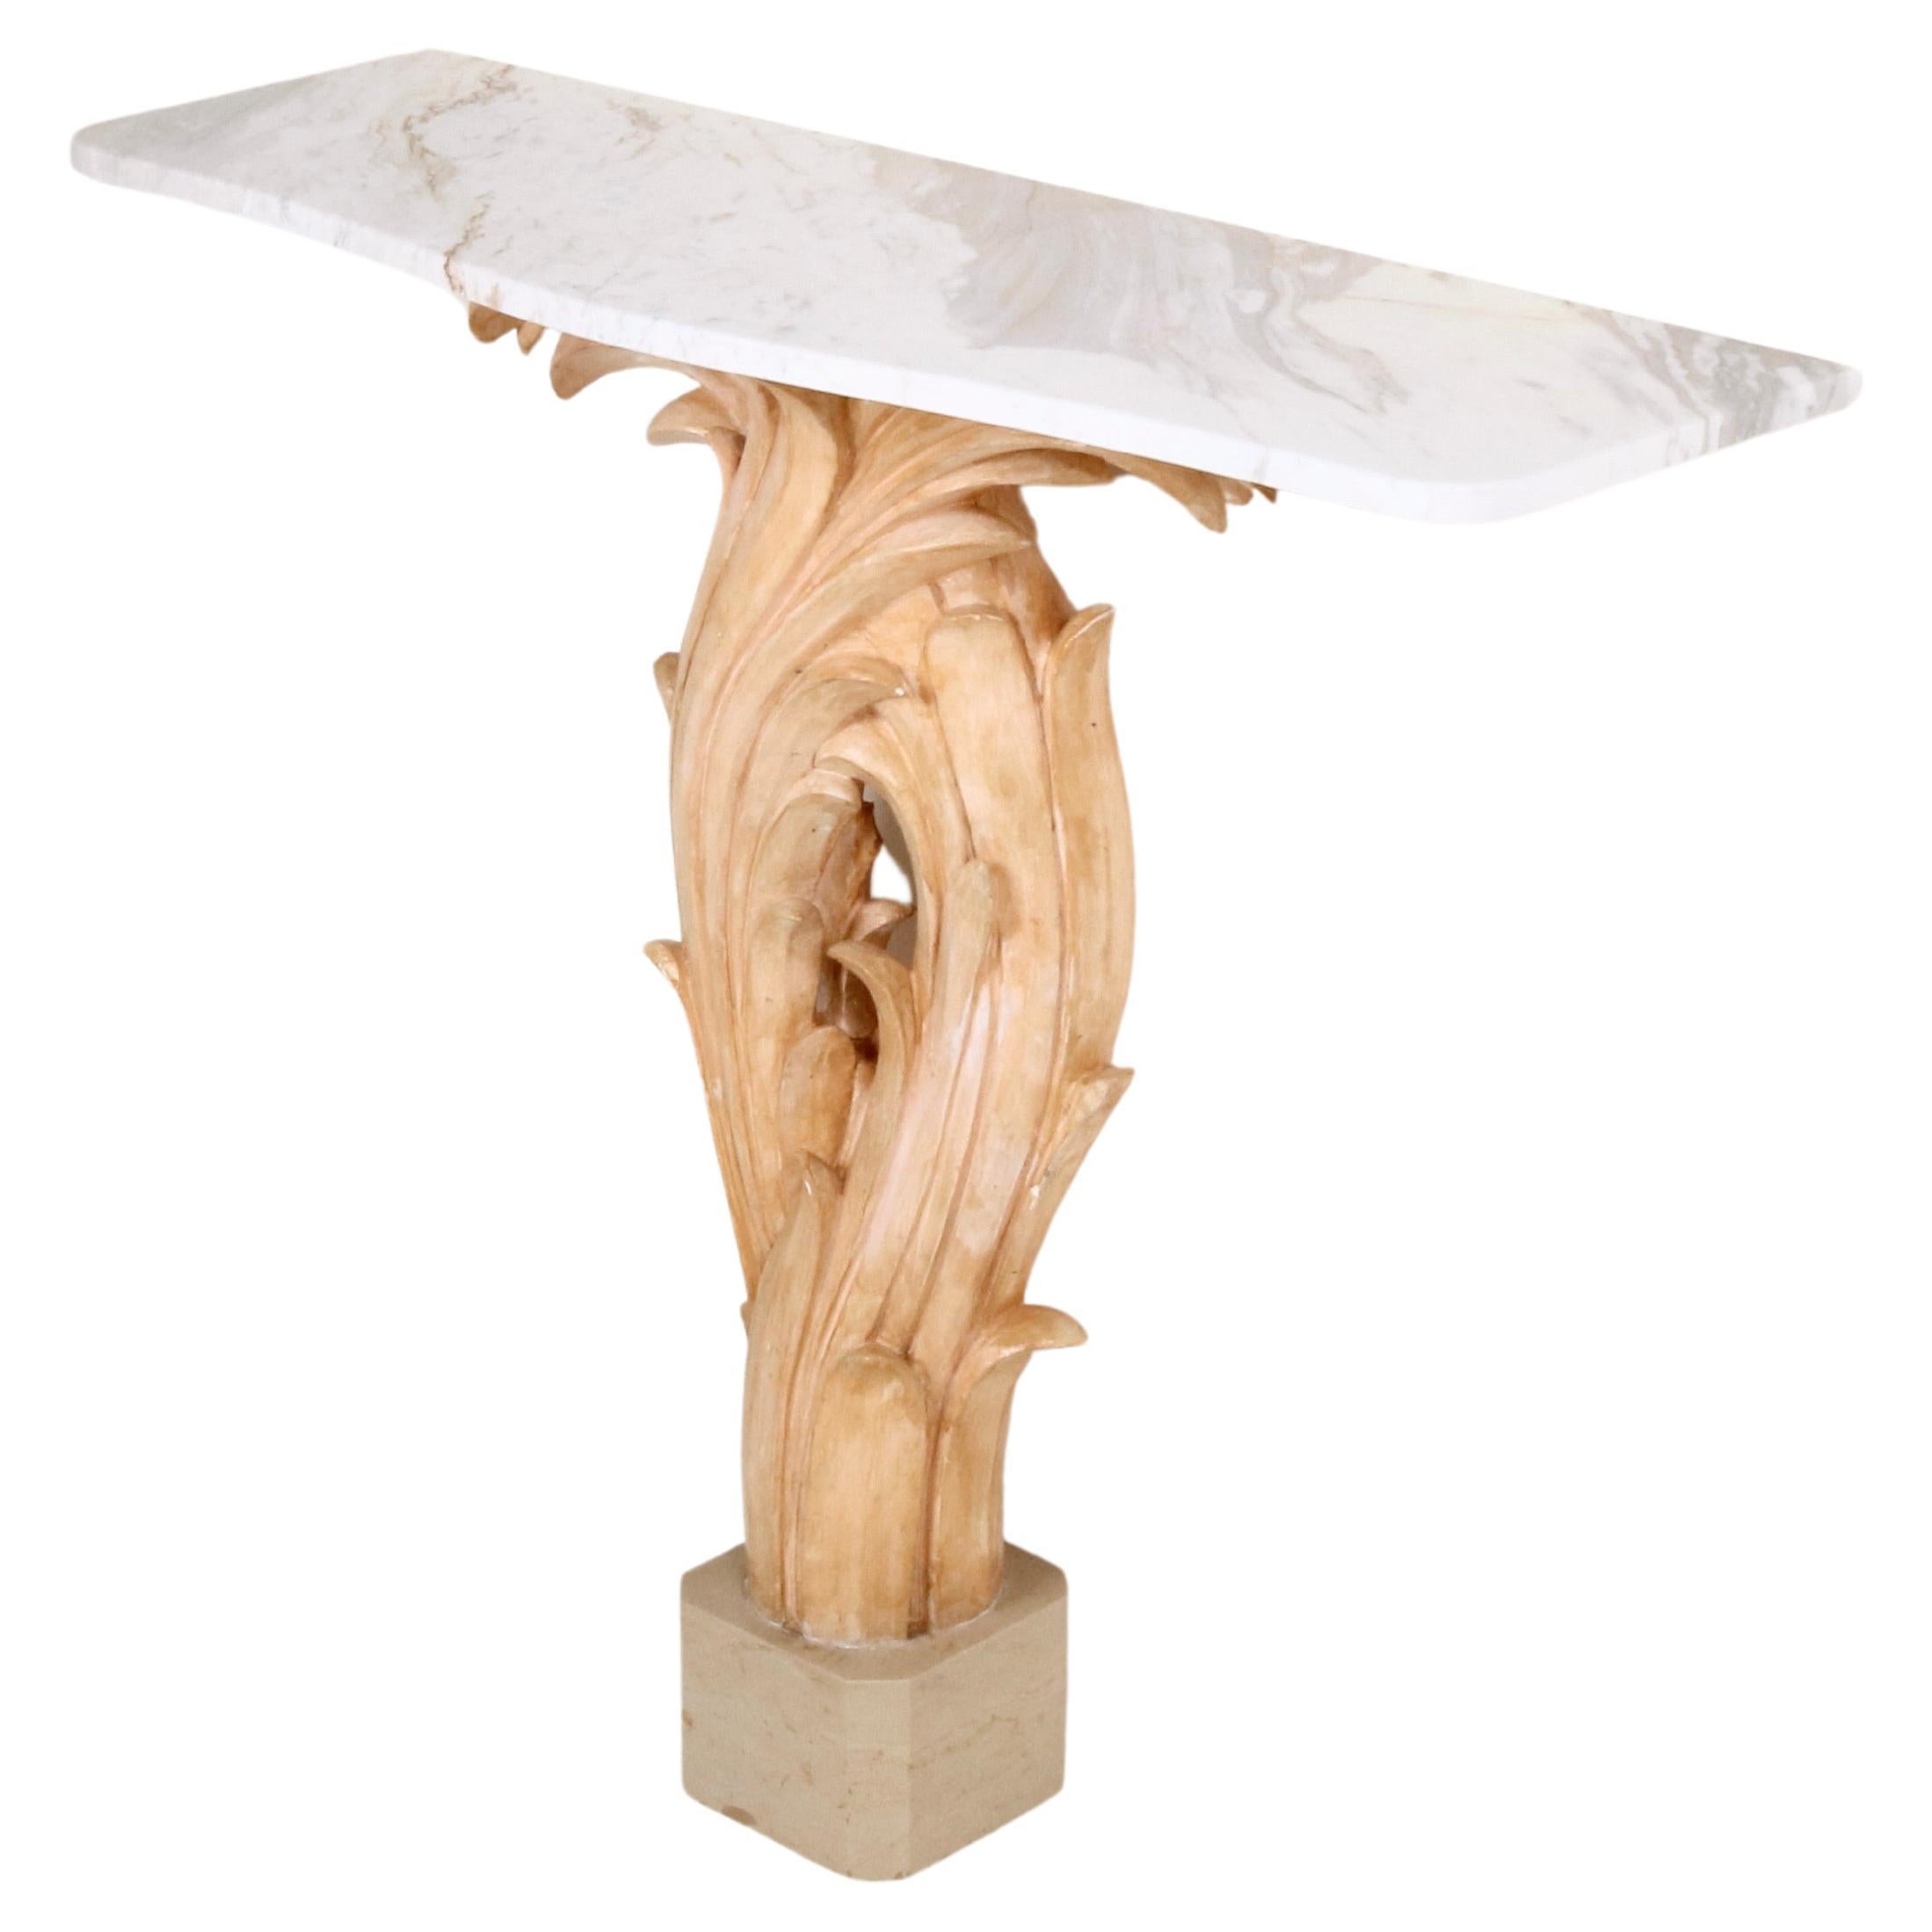 Crafted in the 1950s in France, this console is an exquisite interior with its hand-painted plaster structure, Carrara marble top, and marble base. Its intricate natural motifs, evoking the essence of tree bushes, infuse the design with an organic